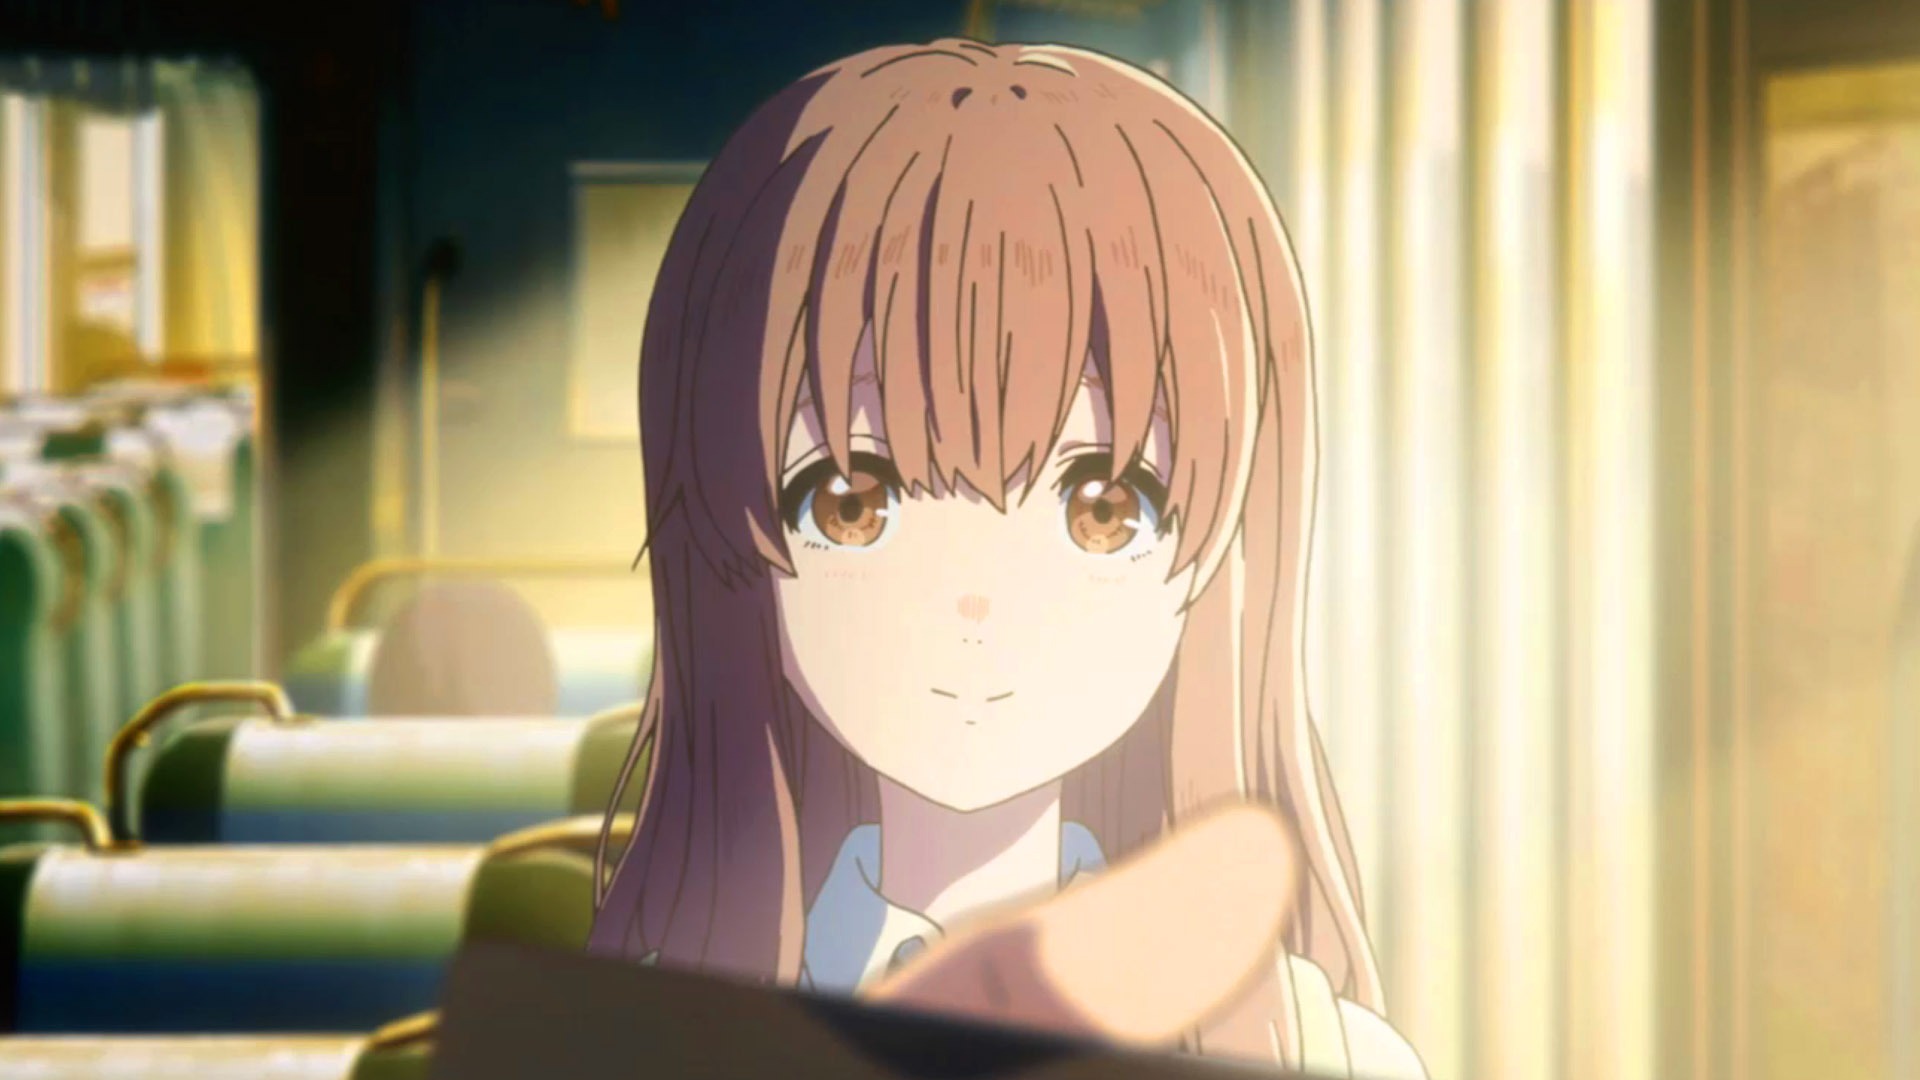 Review: 'A Silent Voice' gives an authentic look at human relationships